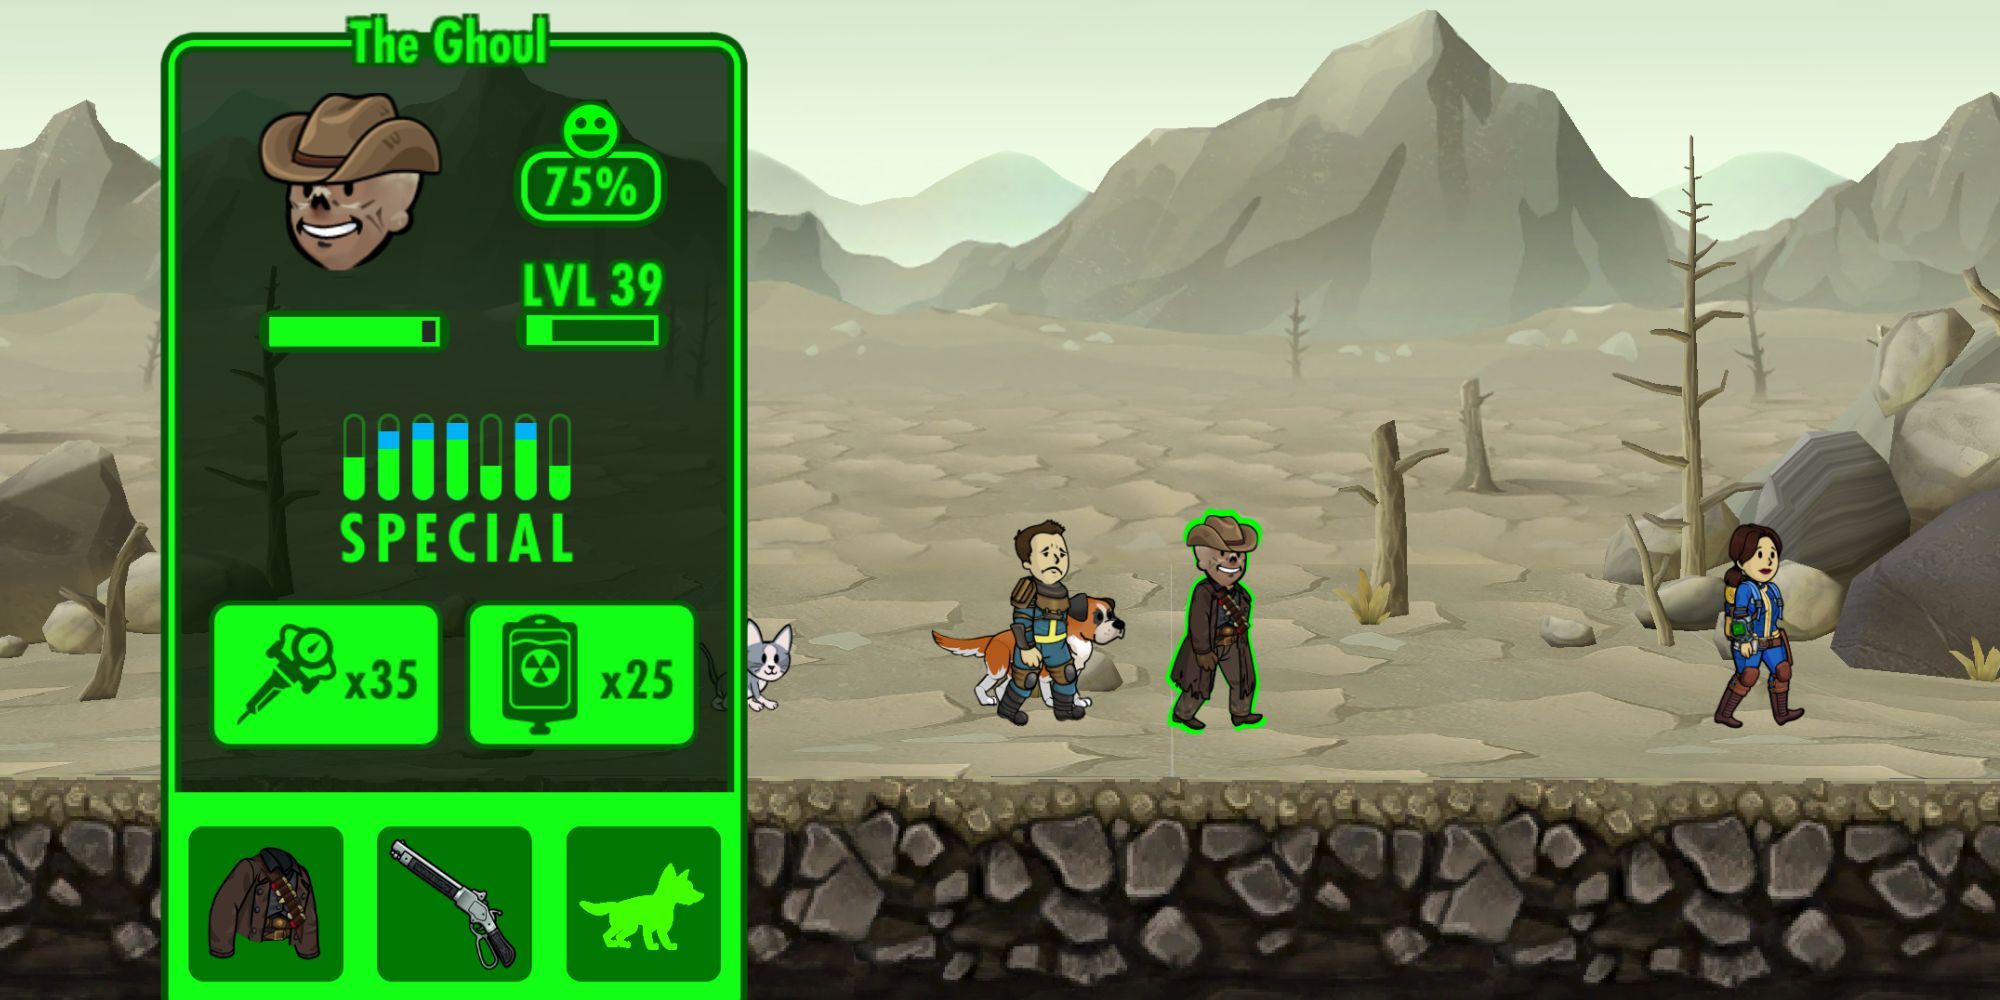 Fallout Shelter - The Ghoul as a Vault Dweller 